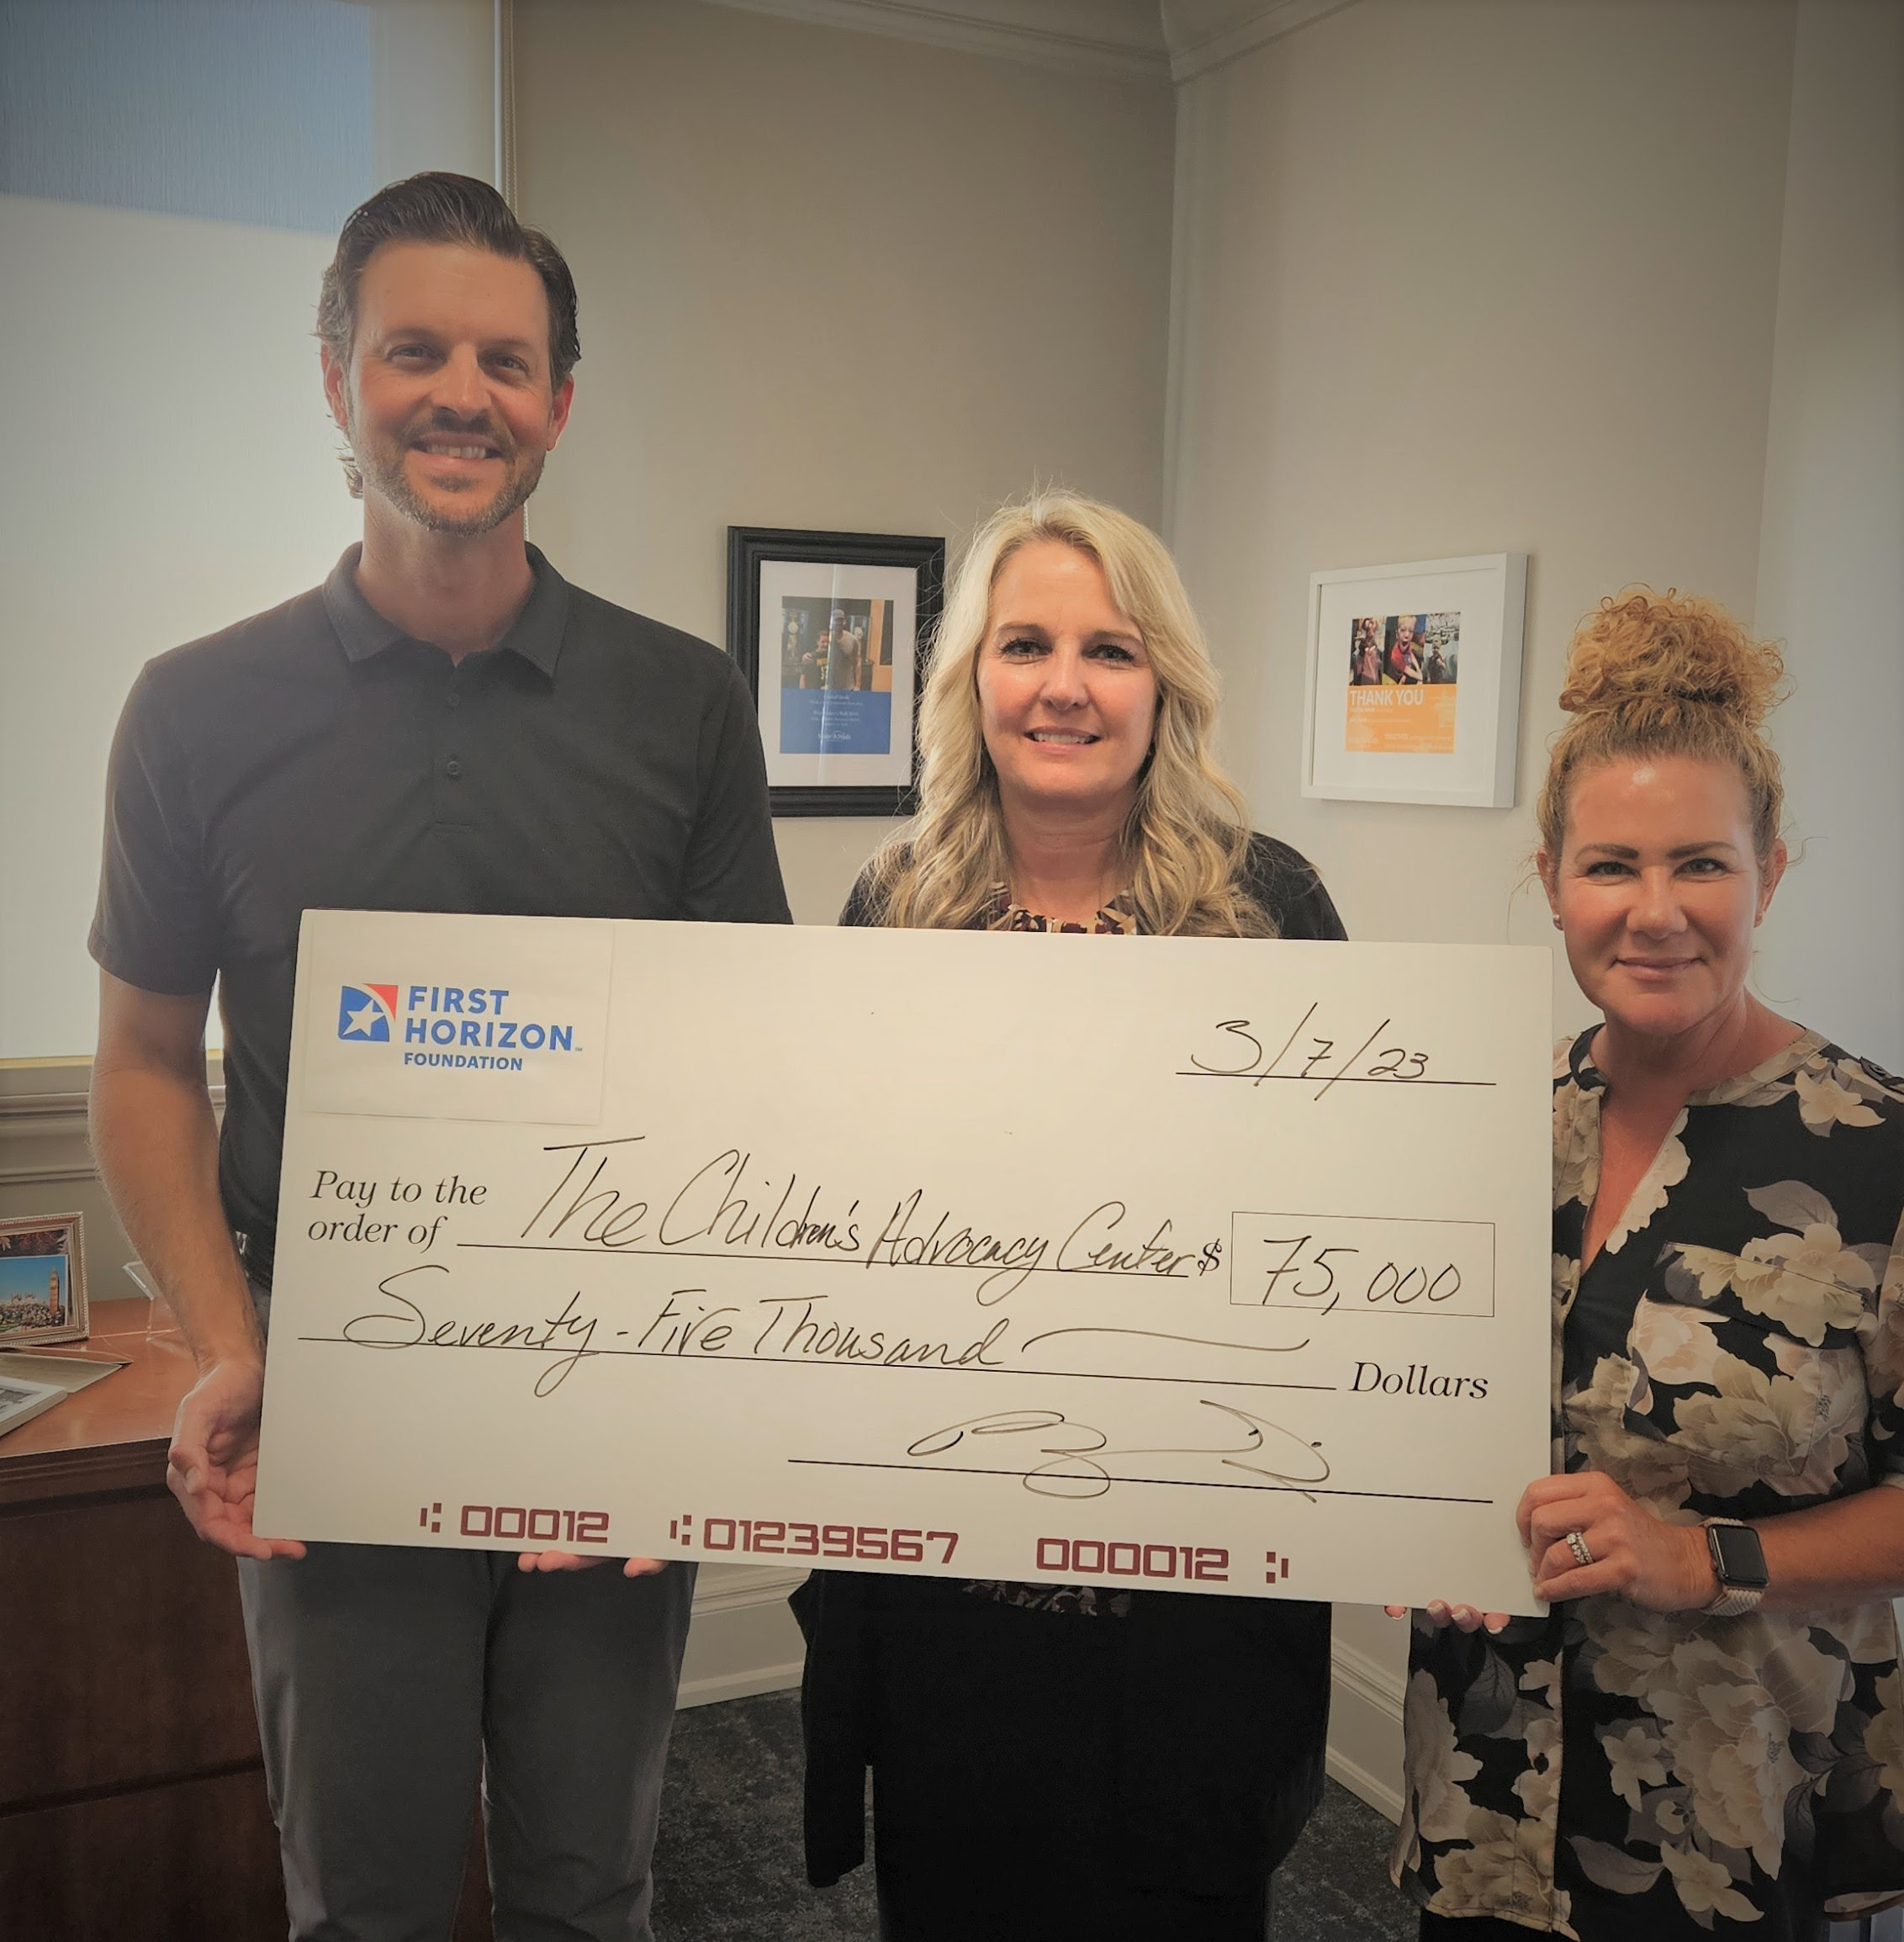 First Horizon Foundation donated $75,000 to the Children’s Advocacy Center of Southwest Florida